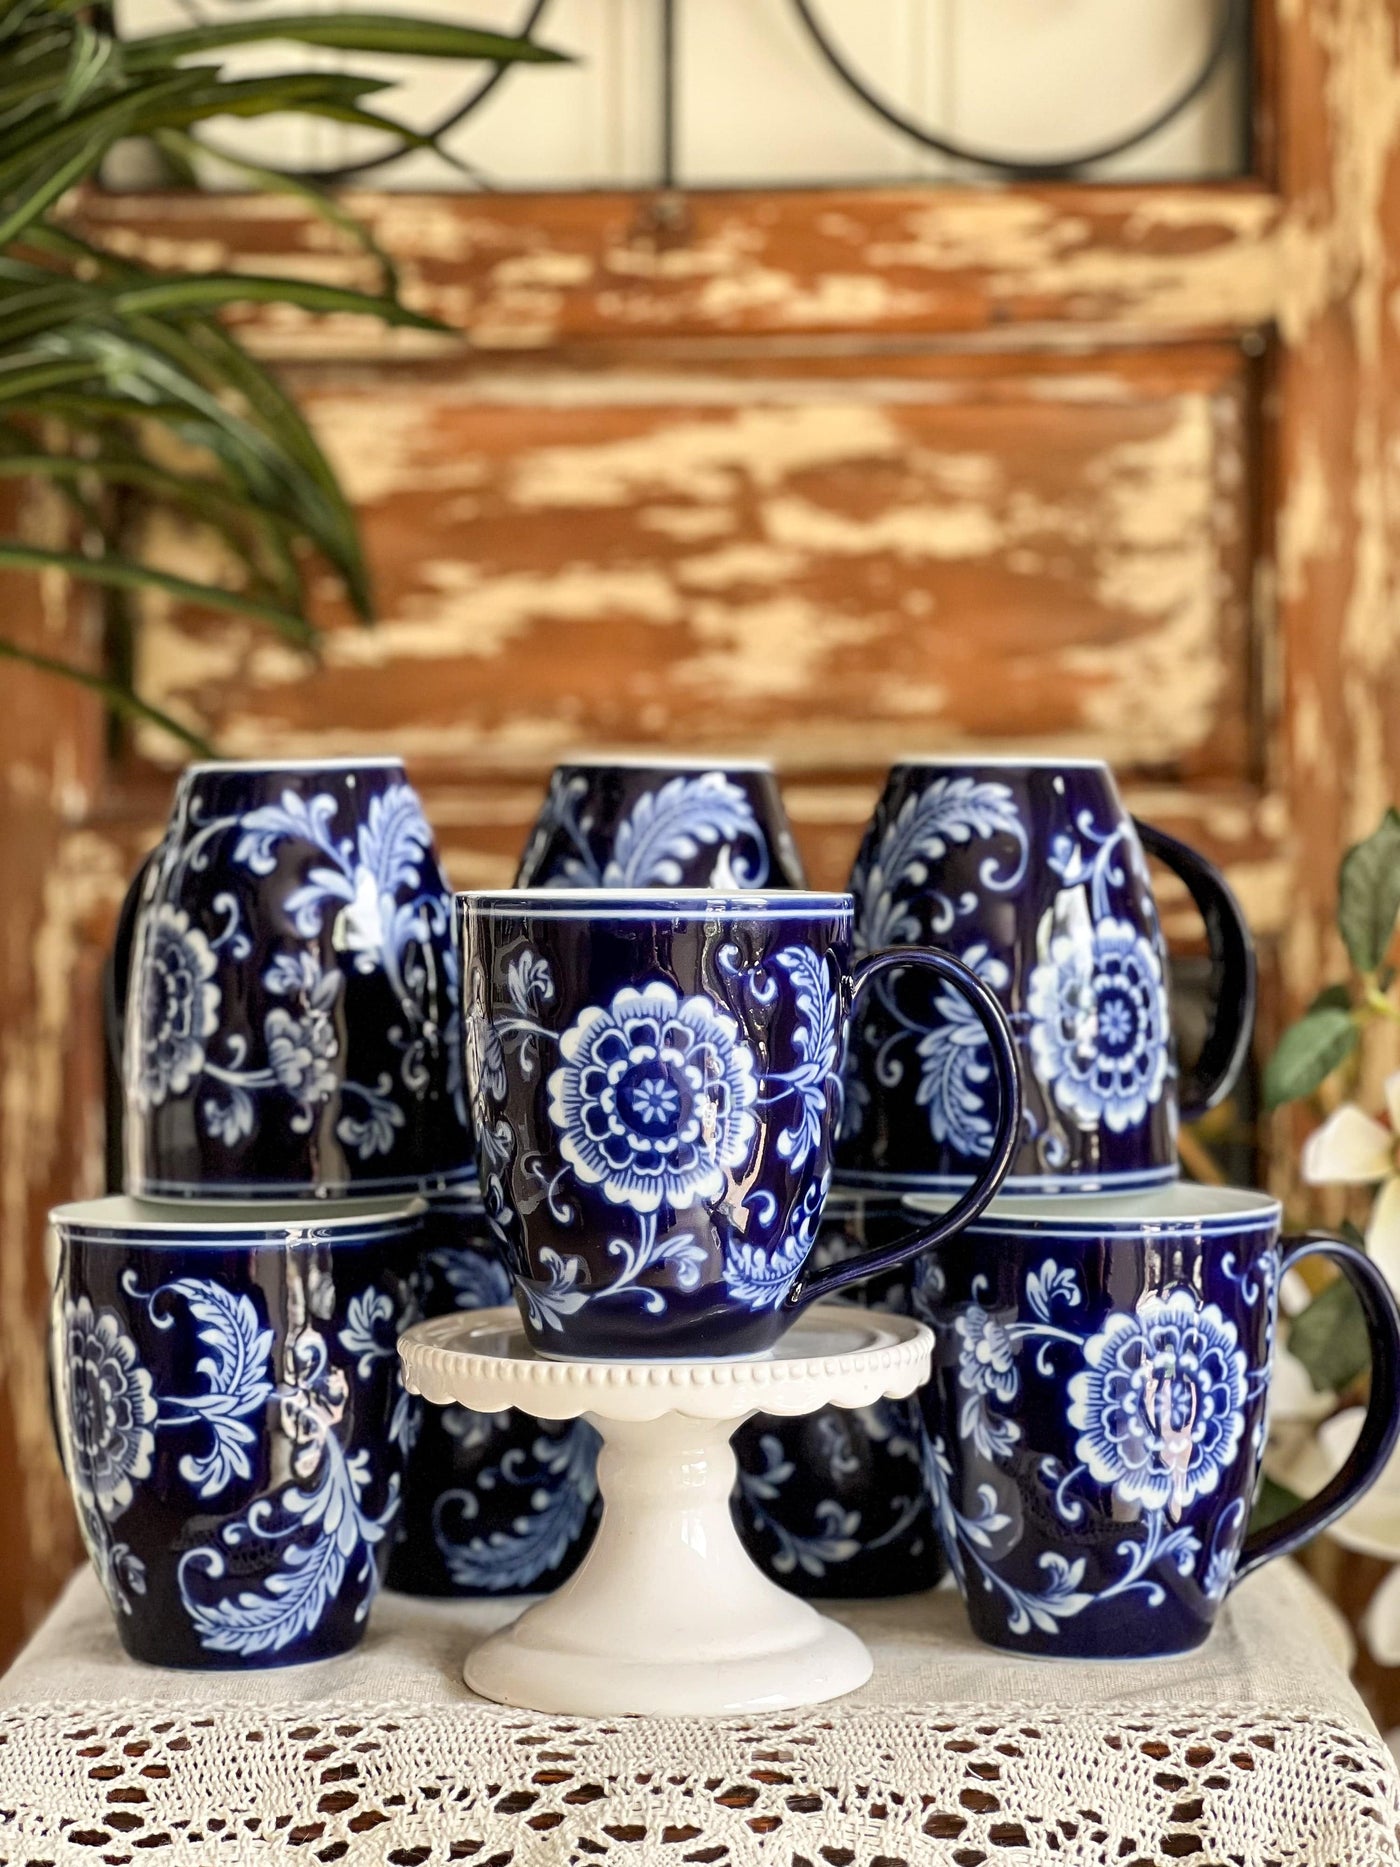 Cobalt Blue & White Mandarin Coffee Mugs by Pier 1 Imports - Vintage Inspired Set of 8 (high demand) Revive In Style Vintage Furniture Painted Refinished Redesign Beautiful One of a Kind Artistic Antique Unique Home Decor Interior Design French Country Shabby Chic Cottage Farmhouse Grandmillenial Coastal Chalk Paint Metallic Glam Eclectic Quality Dovetailed Rustic Furniture Painter Pinterest Bedroom Living Room Entryway Kitchen Home Trends House Styles Decorating ideas